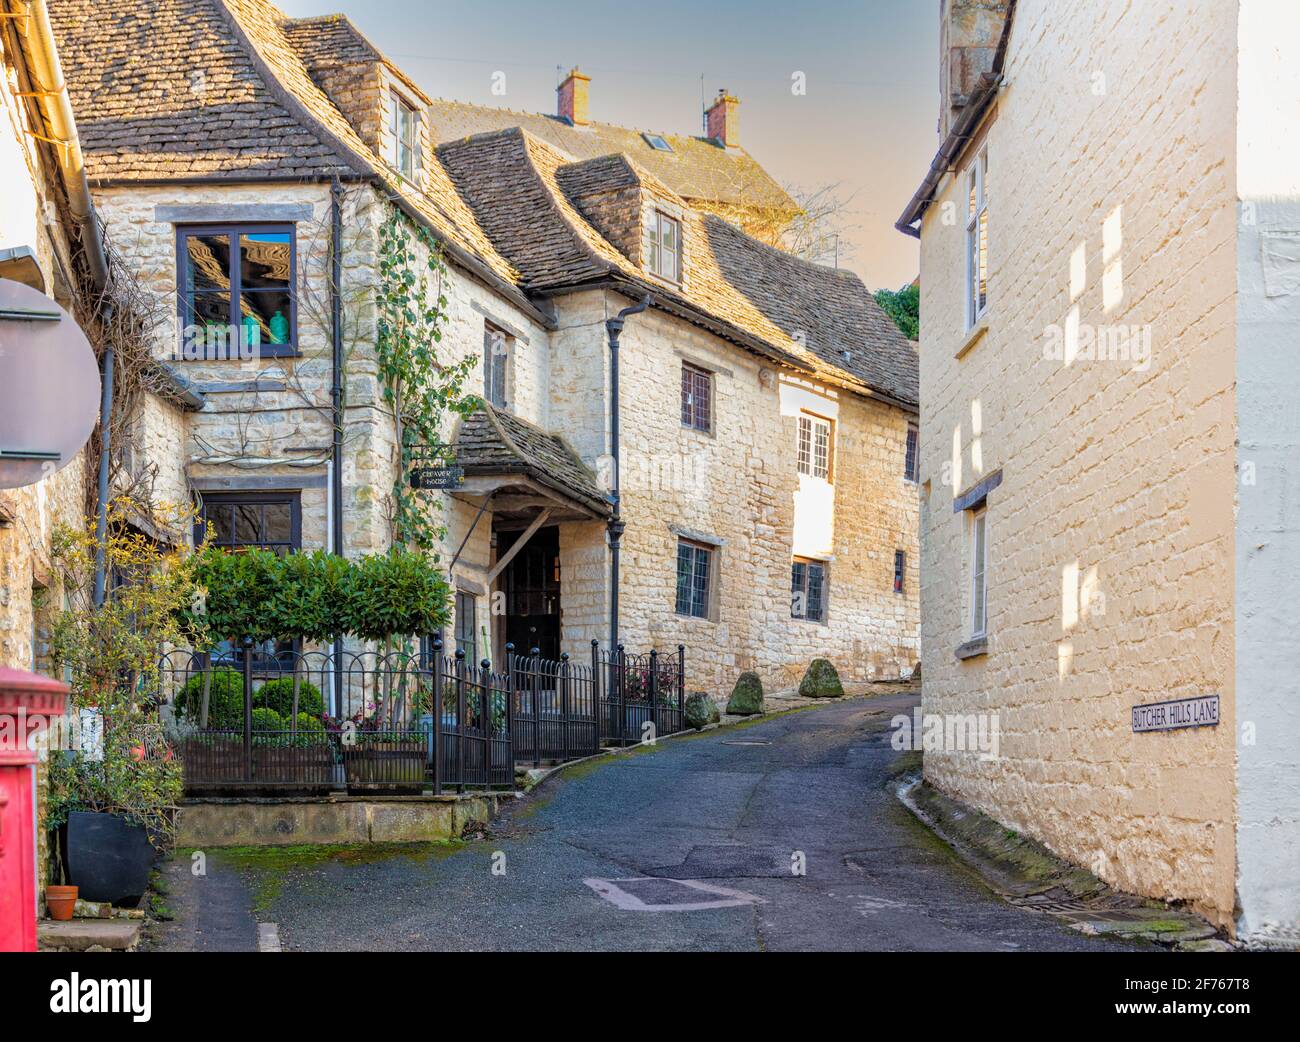 Narrow lane in Nailsworth Town in the Cotswolds, Gloucestershire, United Kingdom Stock Photo